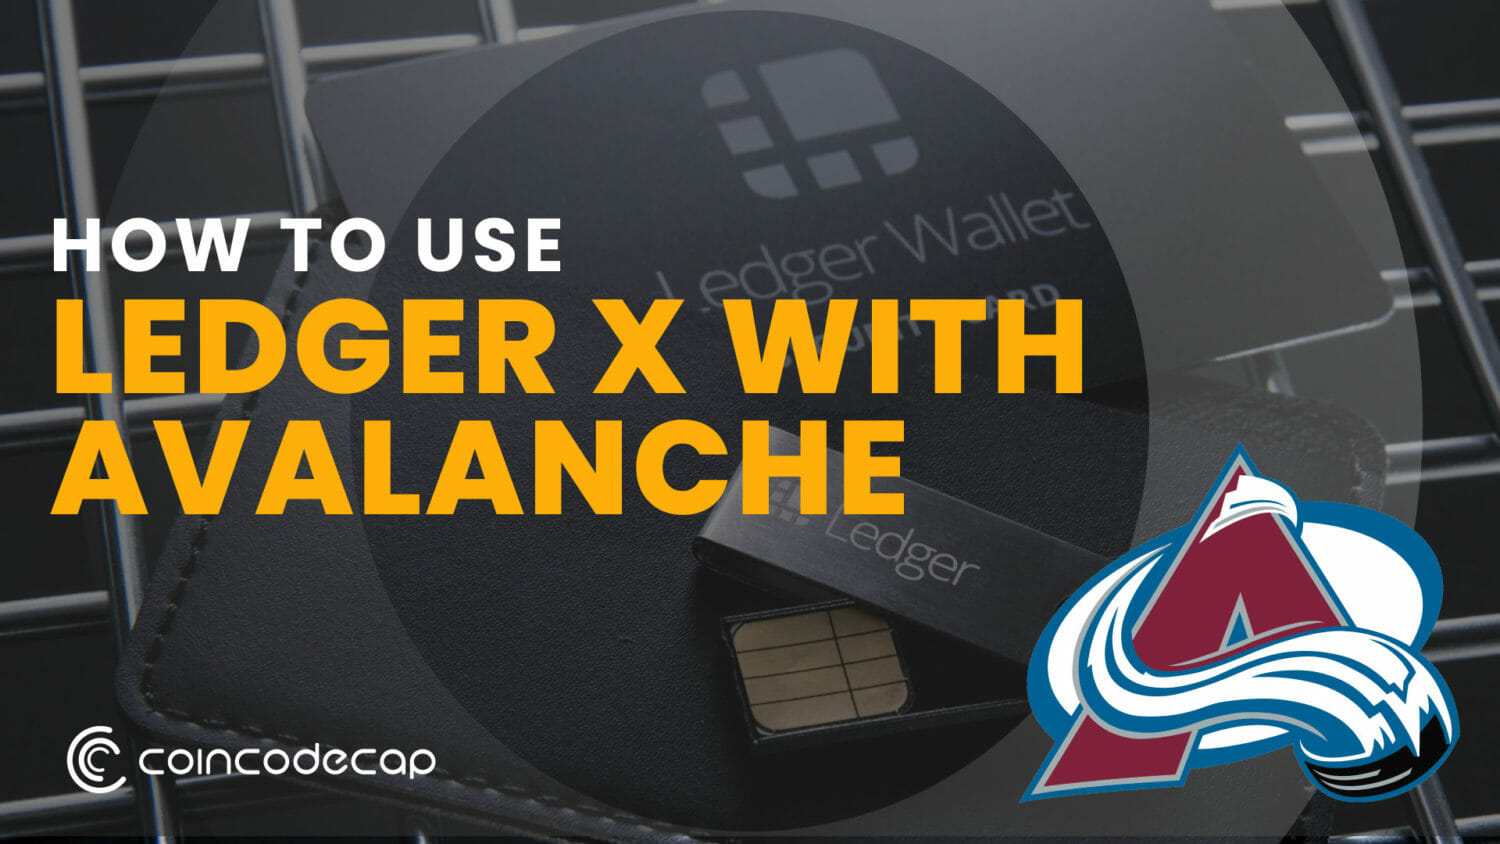 Ledger X With Avalanche